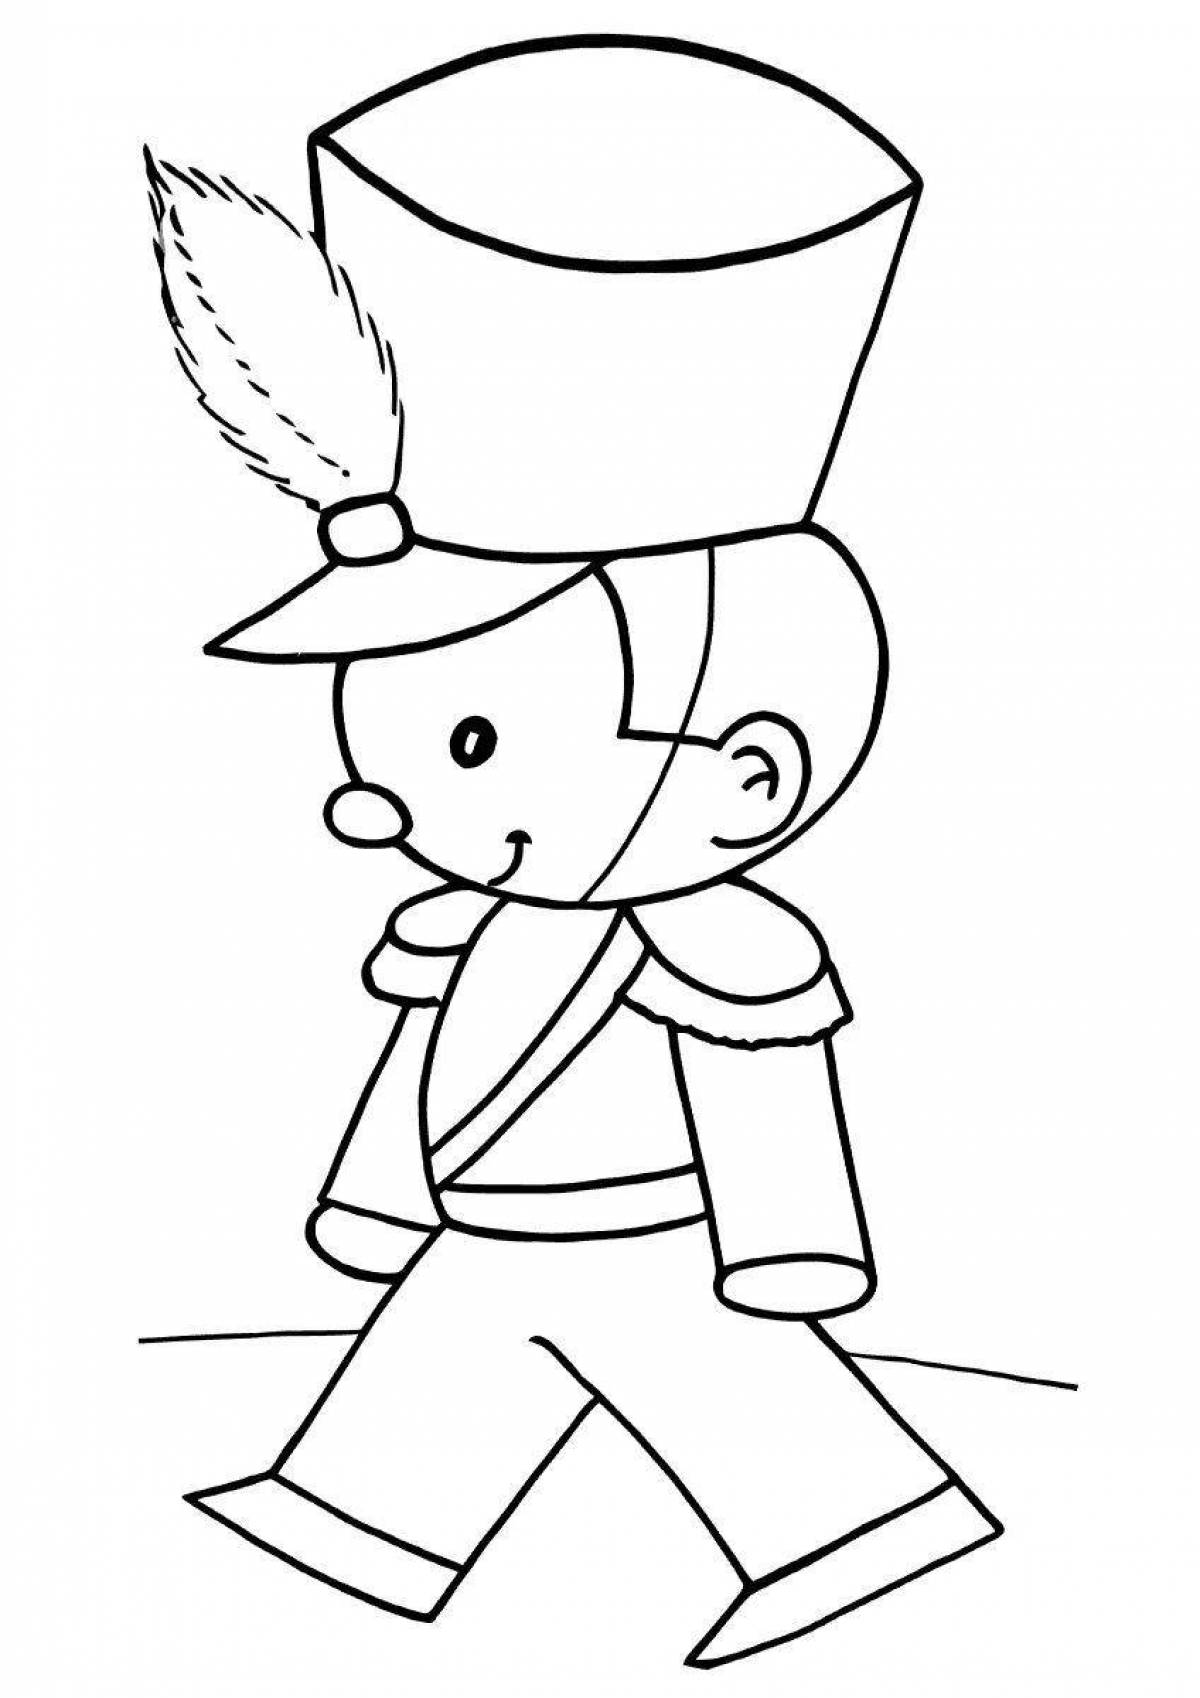 Radiant tenacious tin soldier coloring page